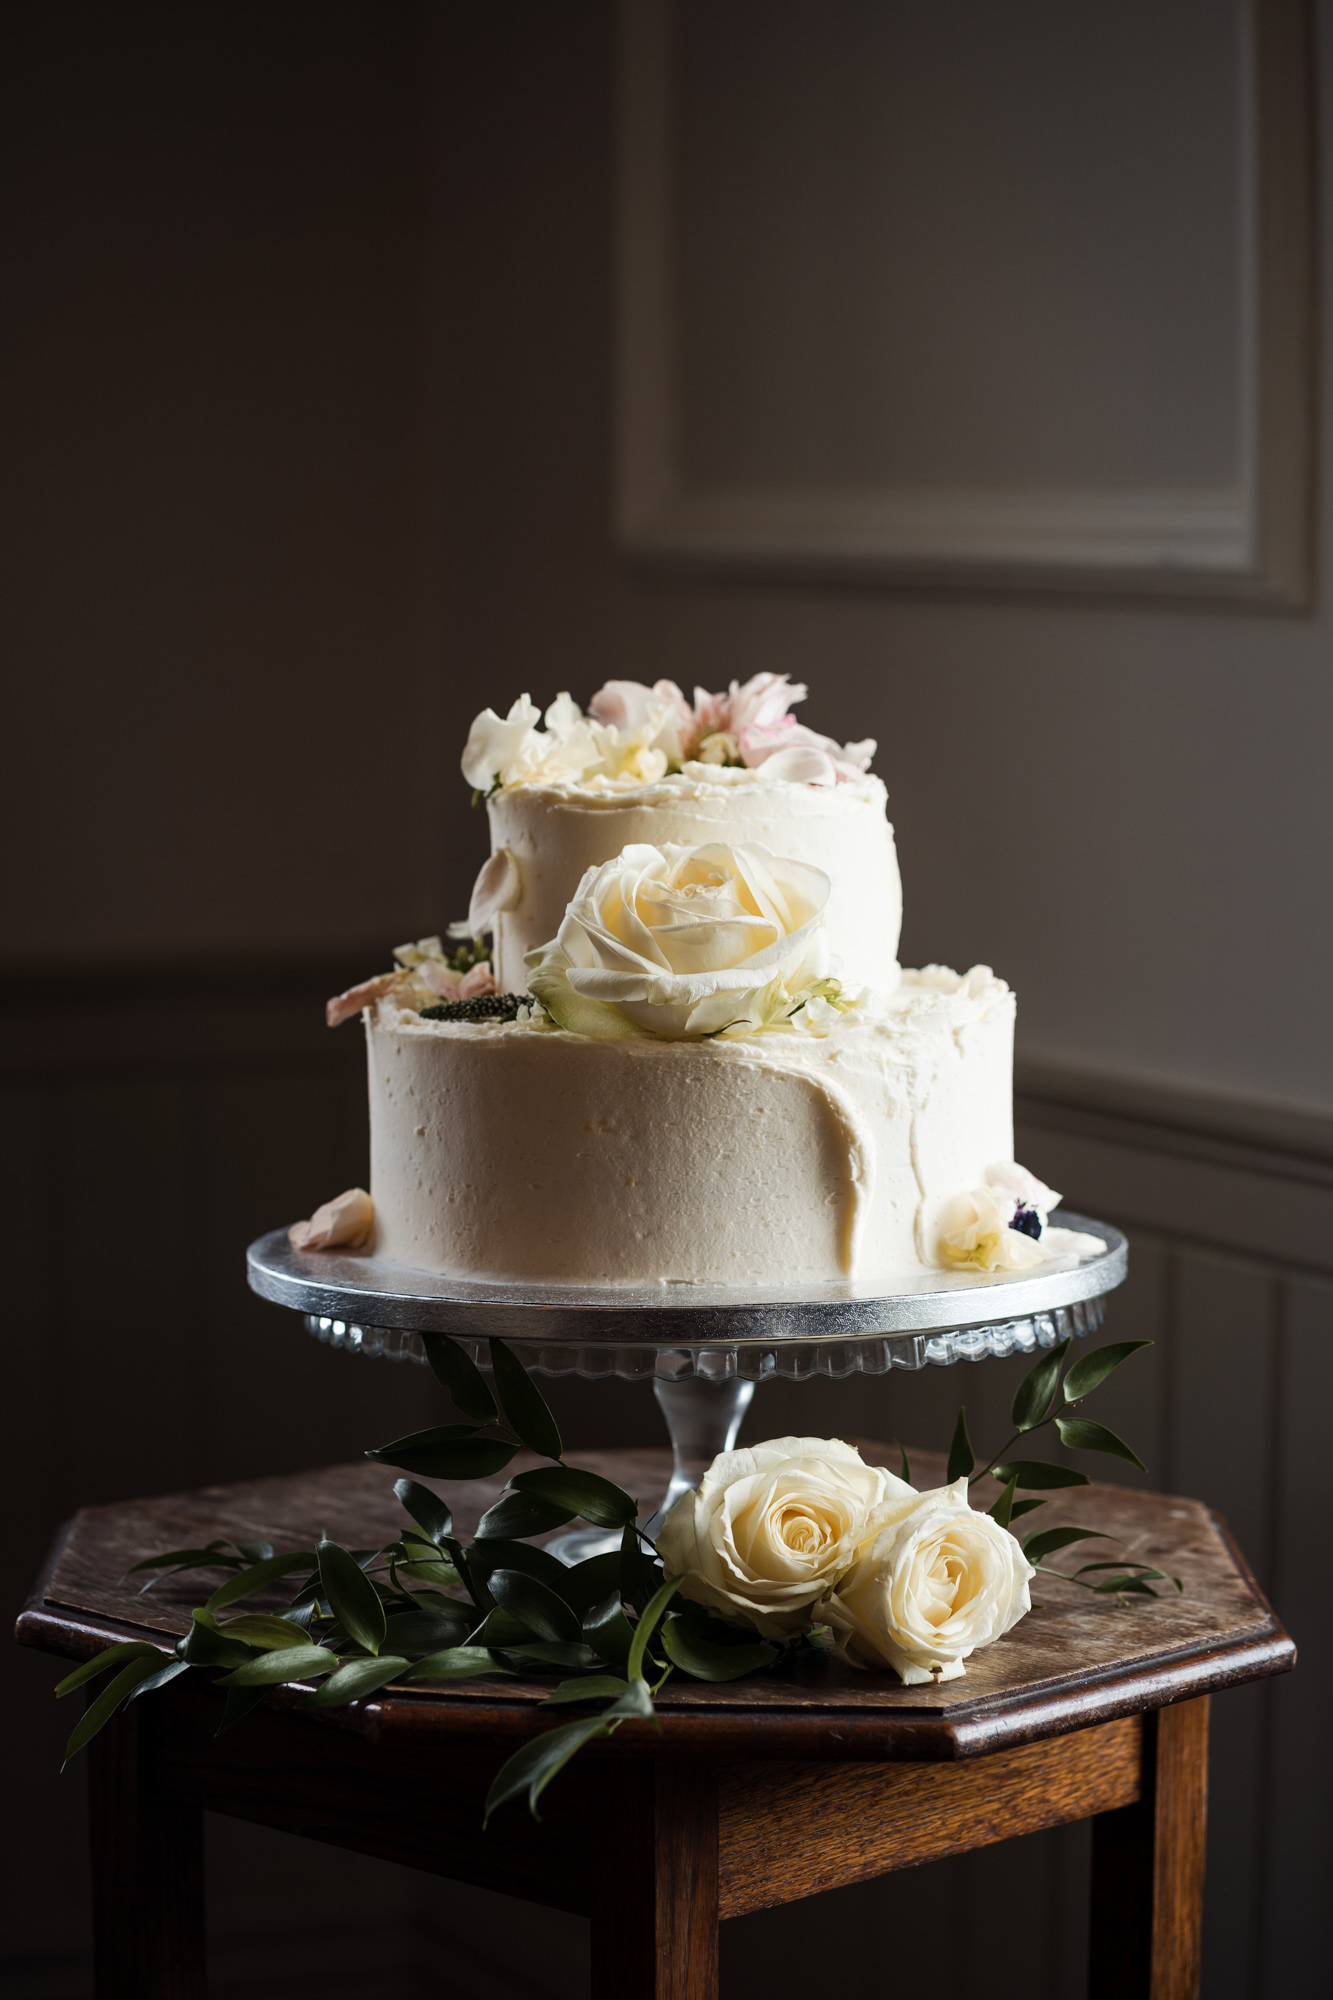 two tier white wedding cake from london's Violet Cakes By Claire Ptak